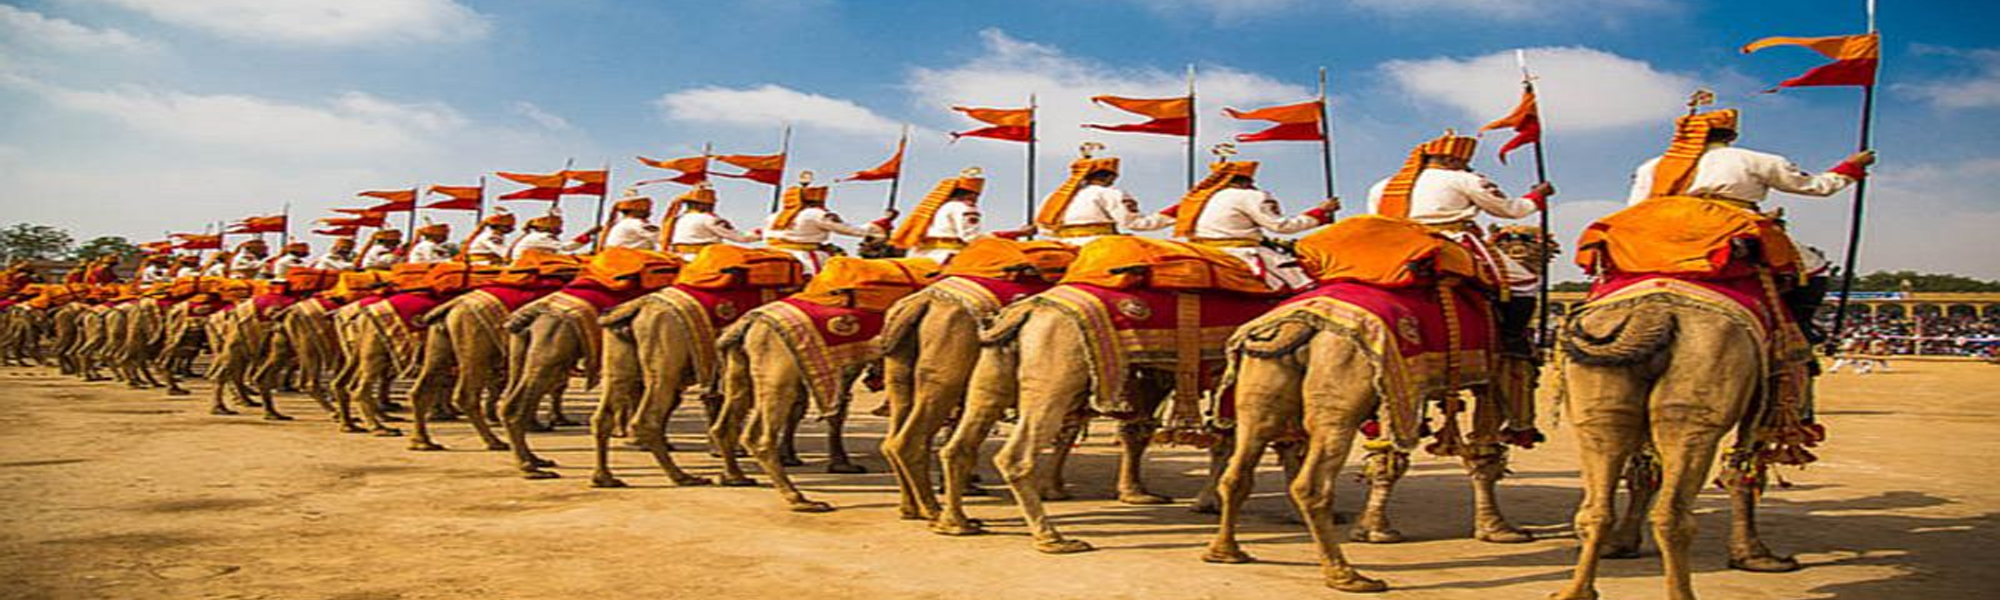 Desert Festival Tours Packages in India